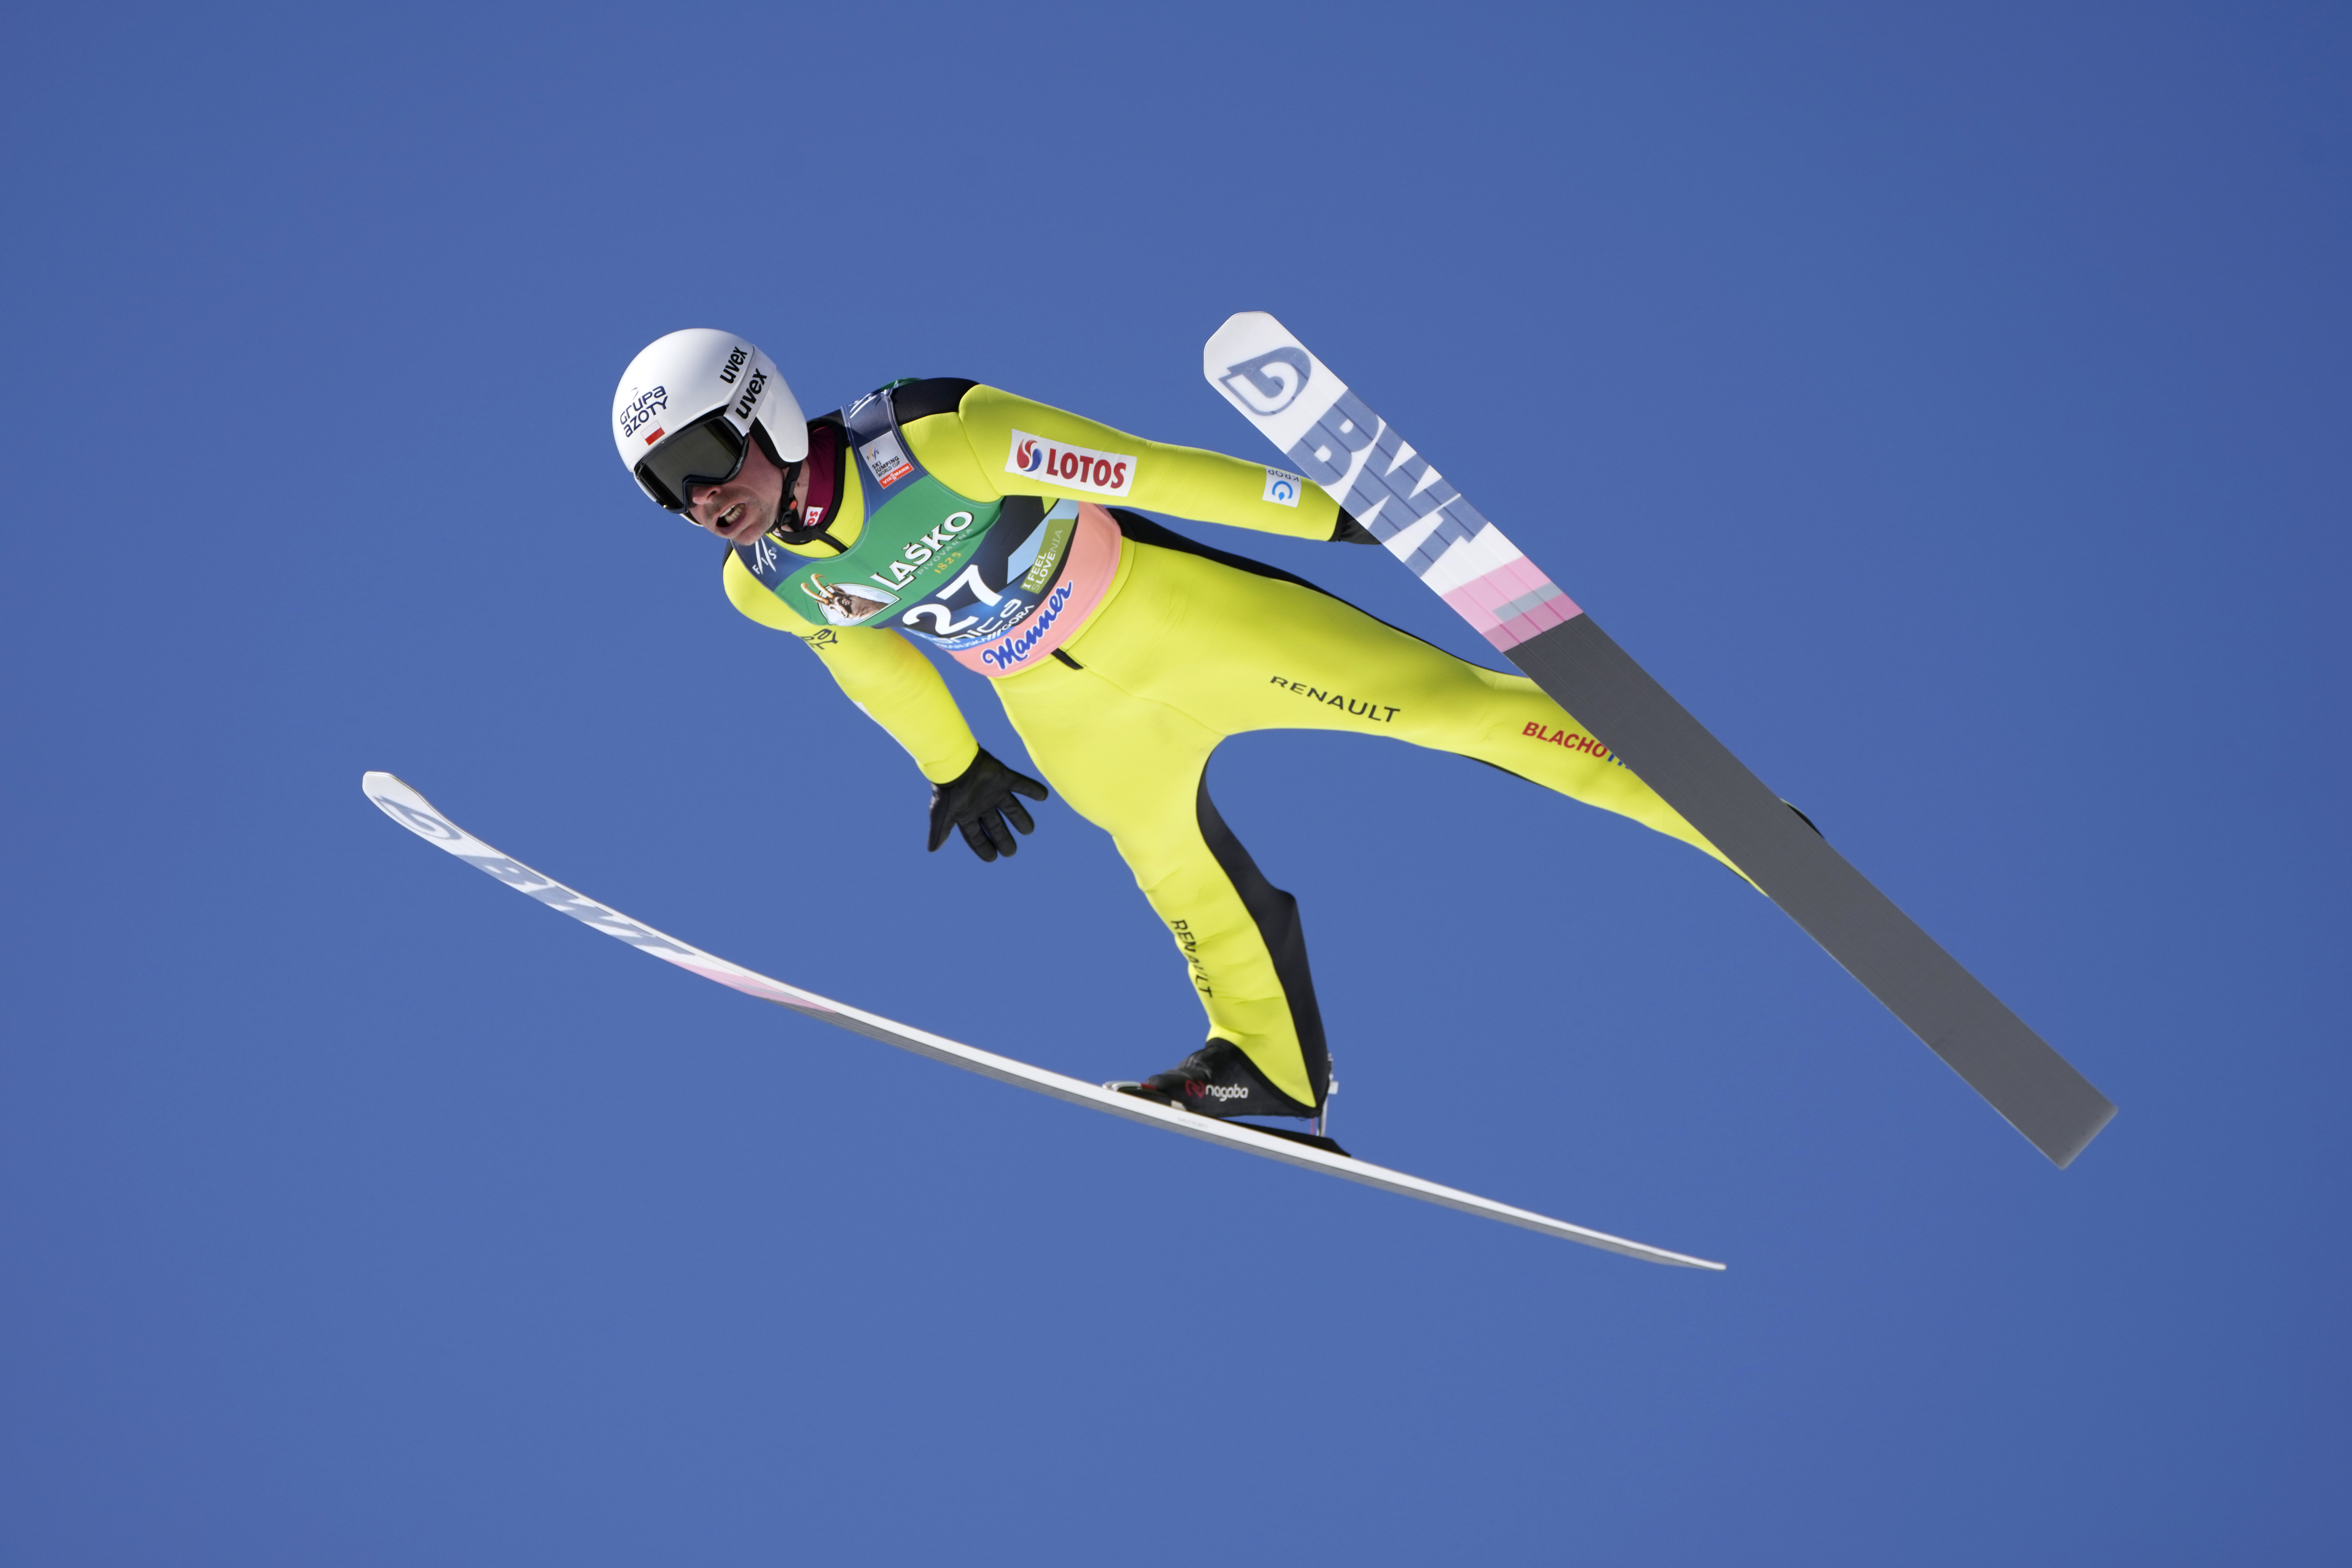 Ski jumping World Cup coming to Upstate NY; first time in US since 2004